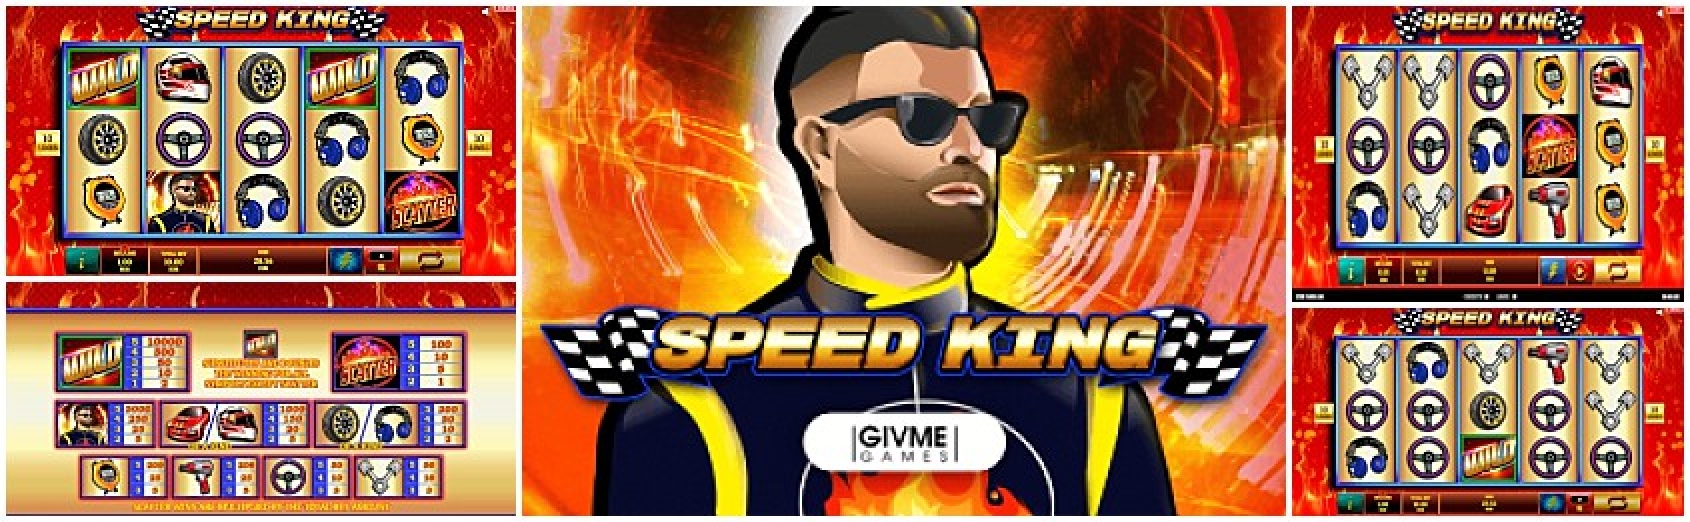 The Speed King Online Slot Demo Game by Givme Games